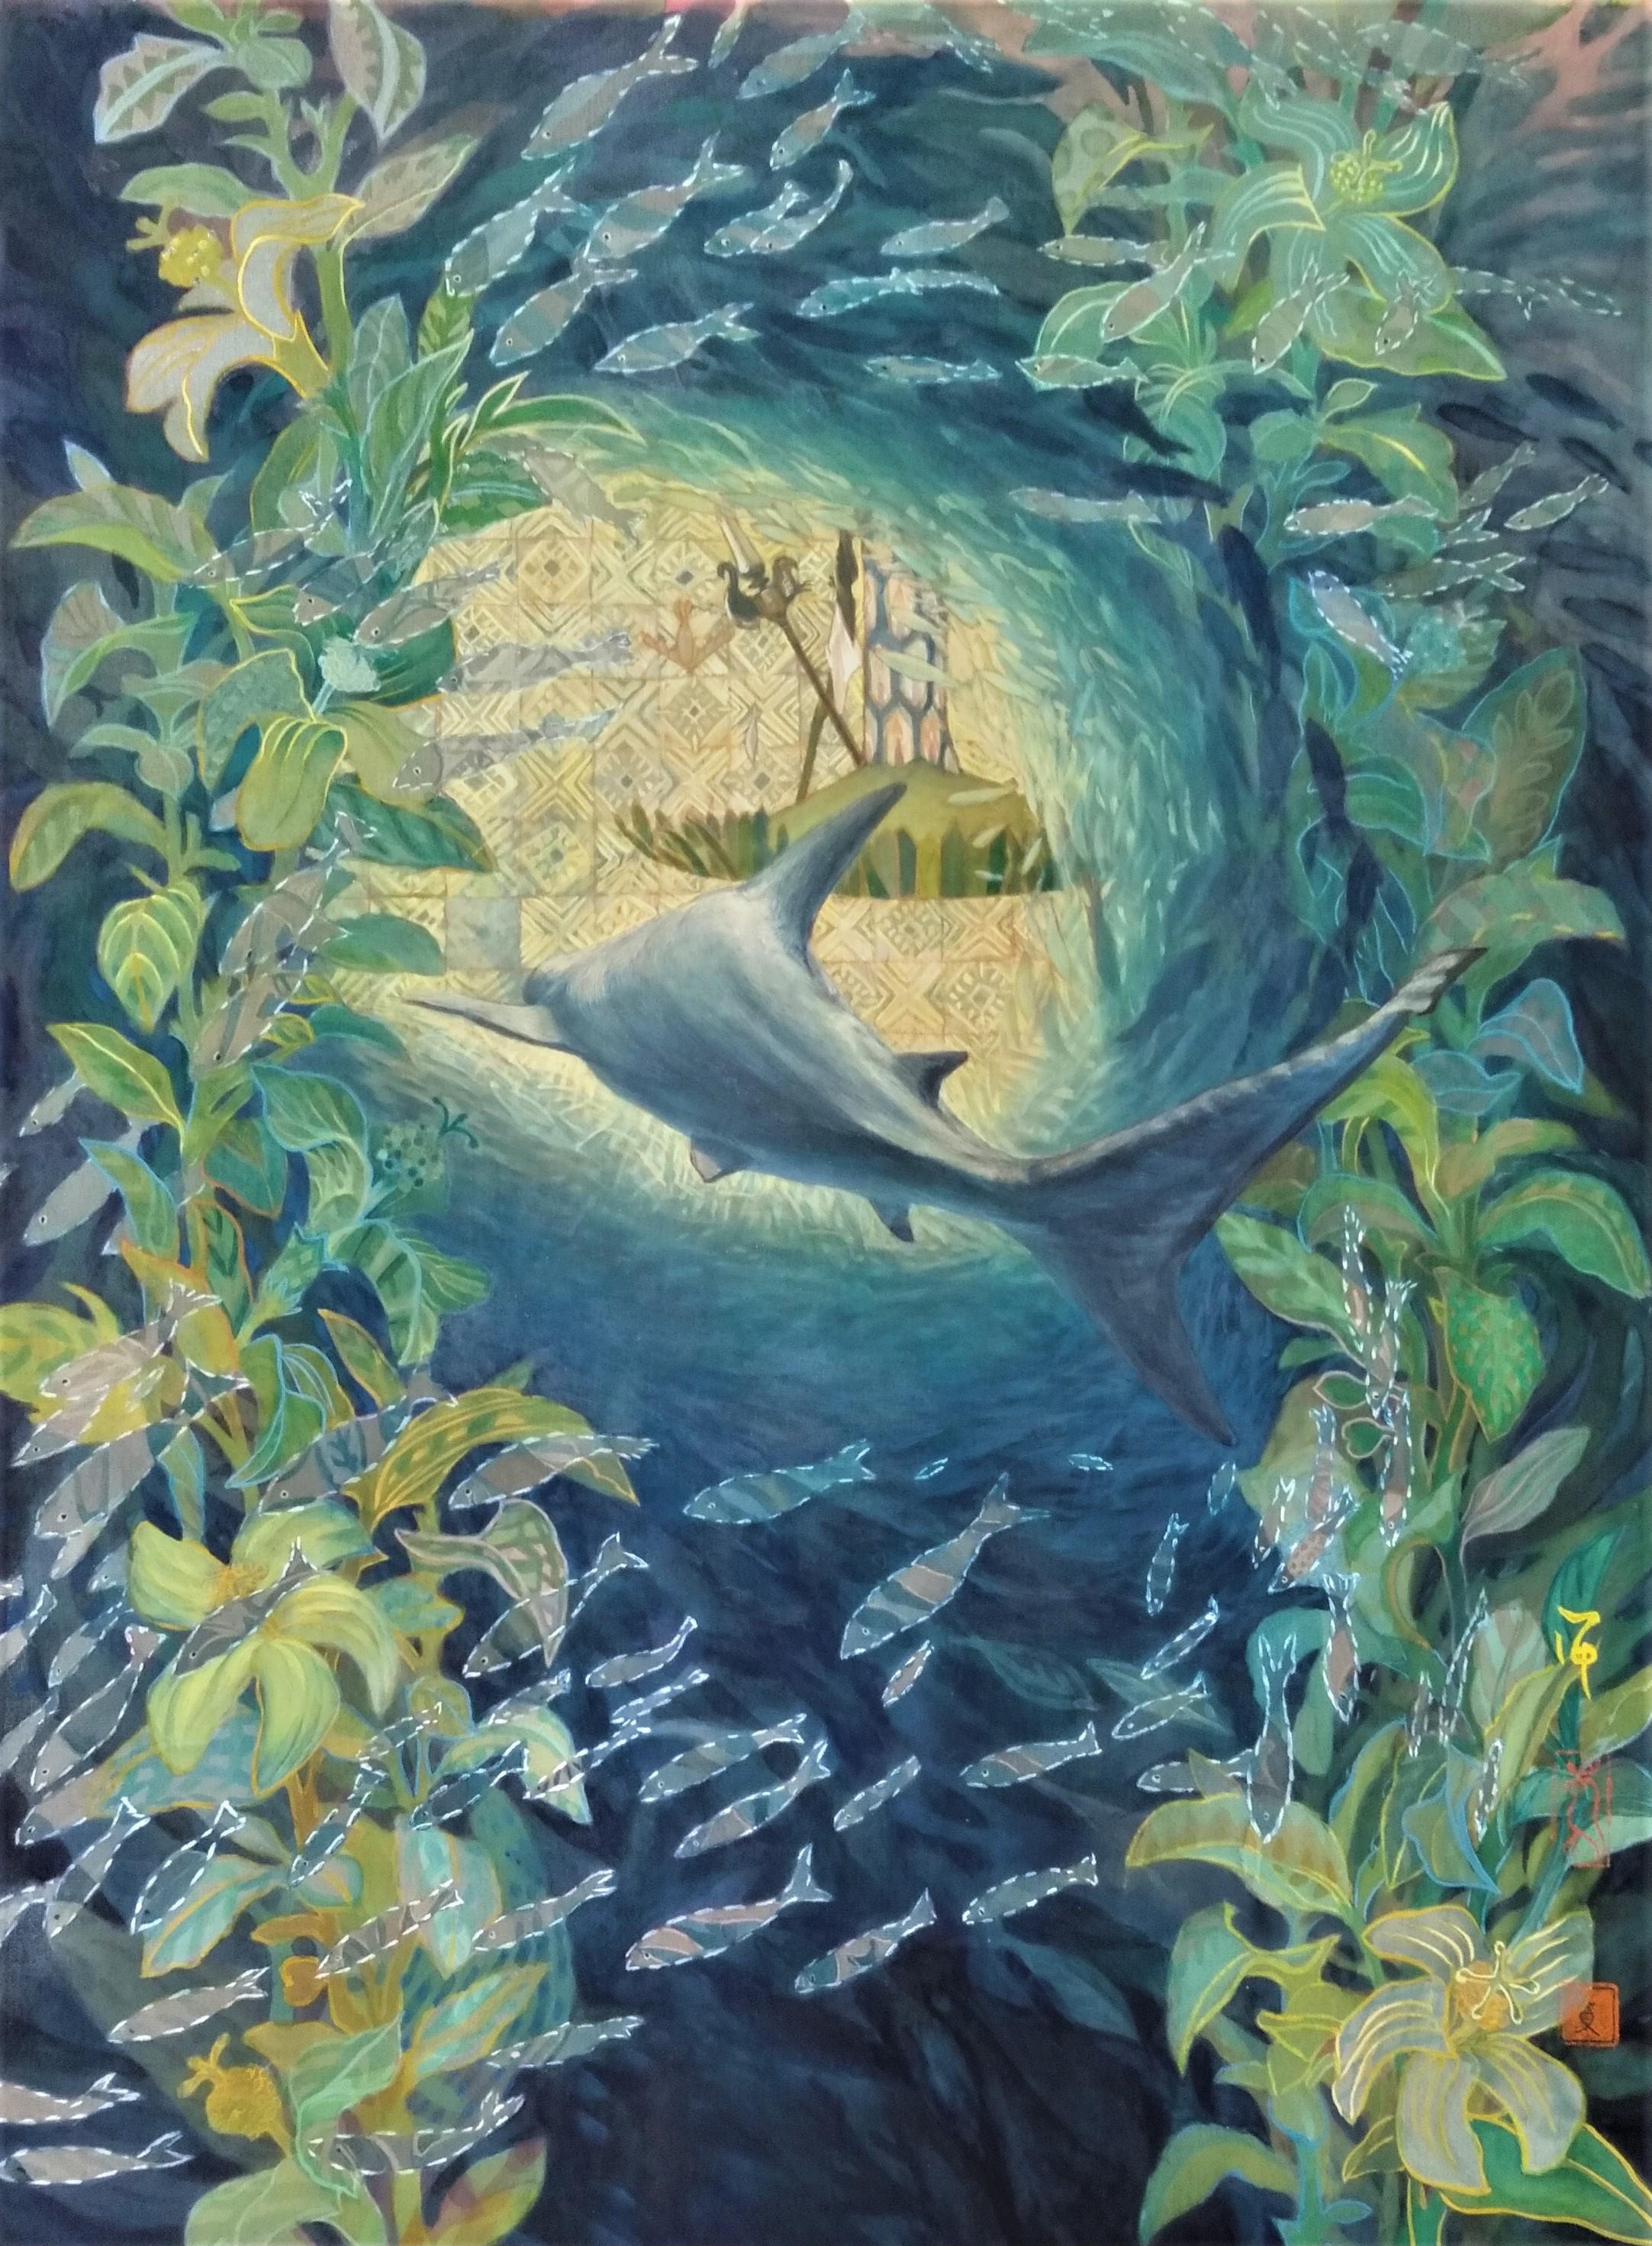 In a Forest of Fishes is 2023 work of Maki Kuchida. Maki paints with natural mineral pigments on silk. The work is about the harmony of the sea world where all fish species can live with freedom. 

The painted size of the work is approx. 45 x 35cm,